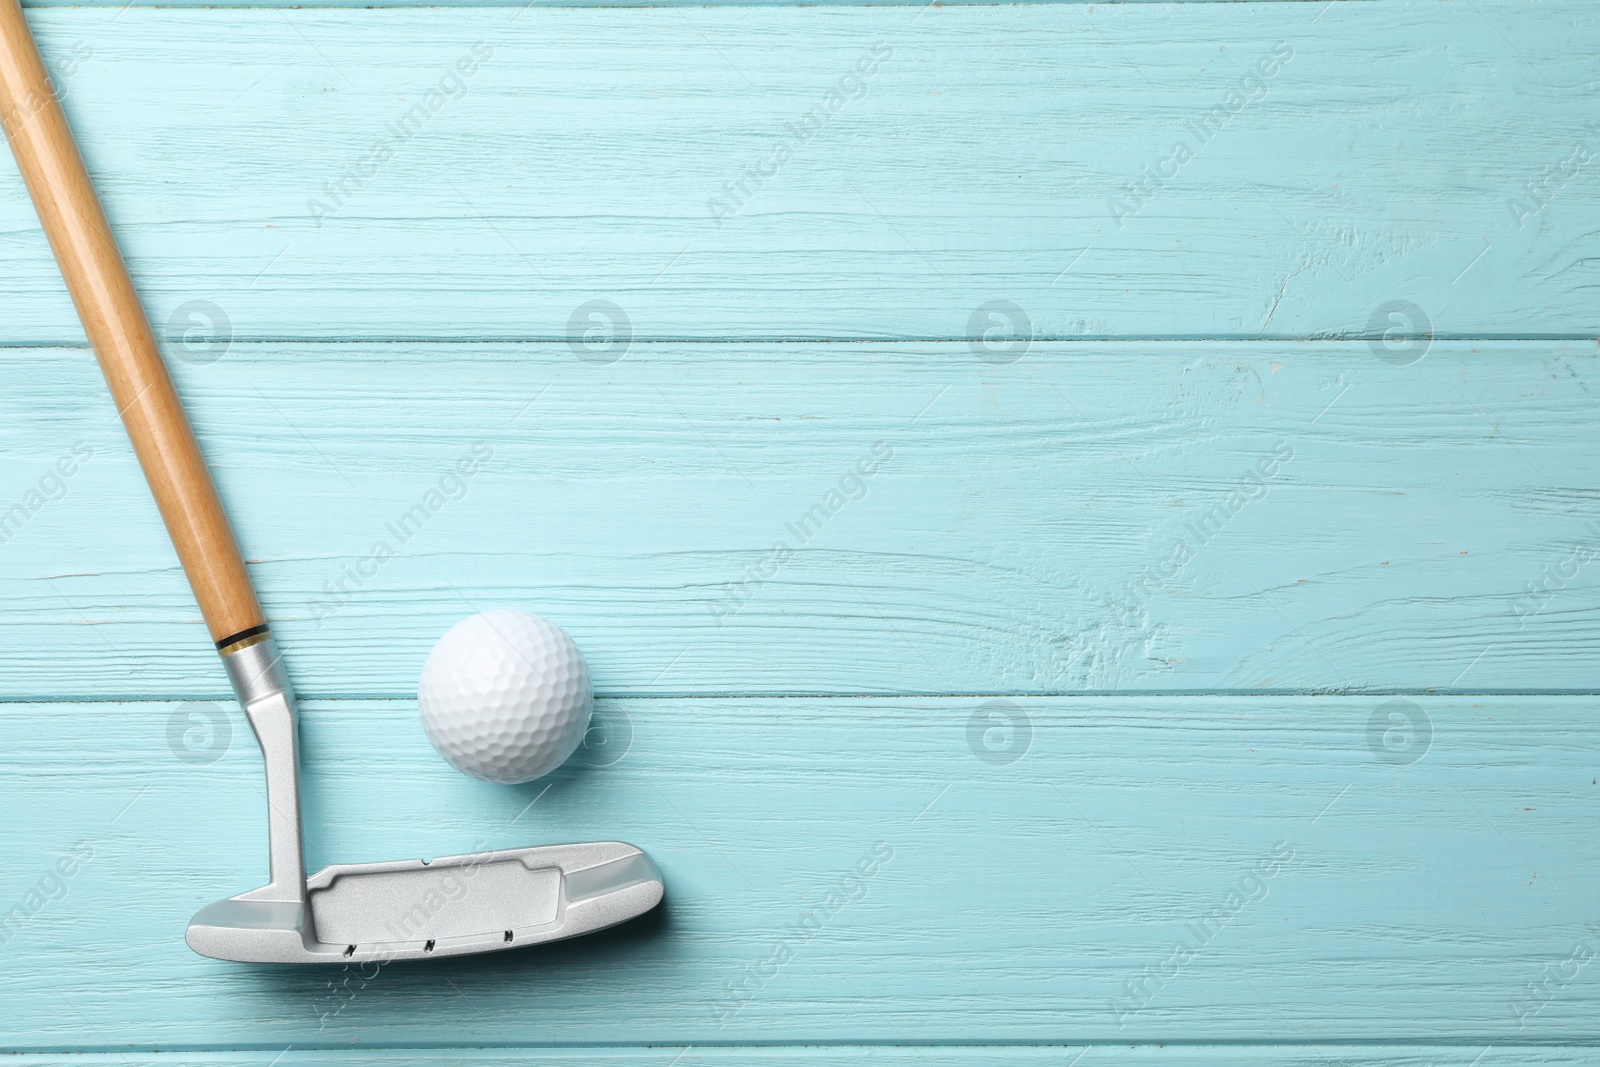 Photo of Golf club and ball on wooden background, flat lay with space for text